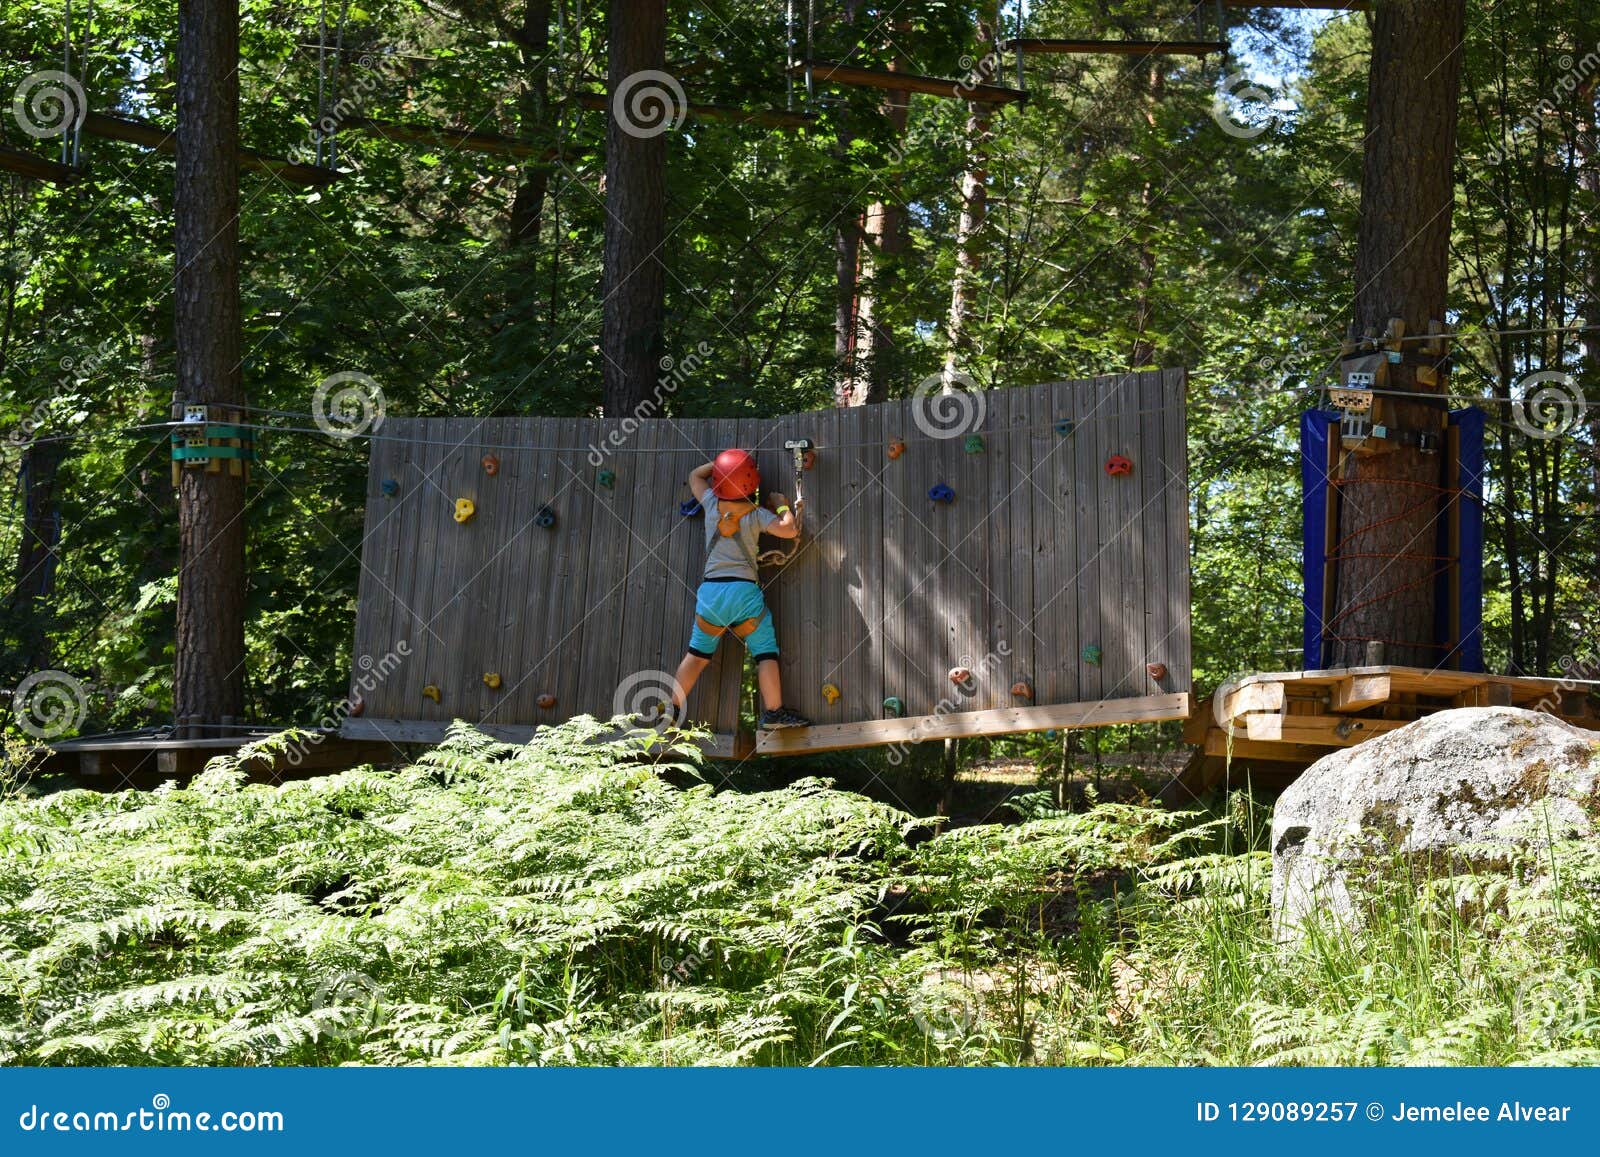 A Boy Trying To Conquer a Wall Climbing Obstacle Editorial Photography ...